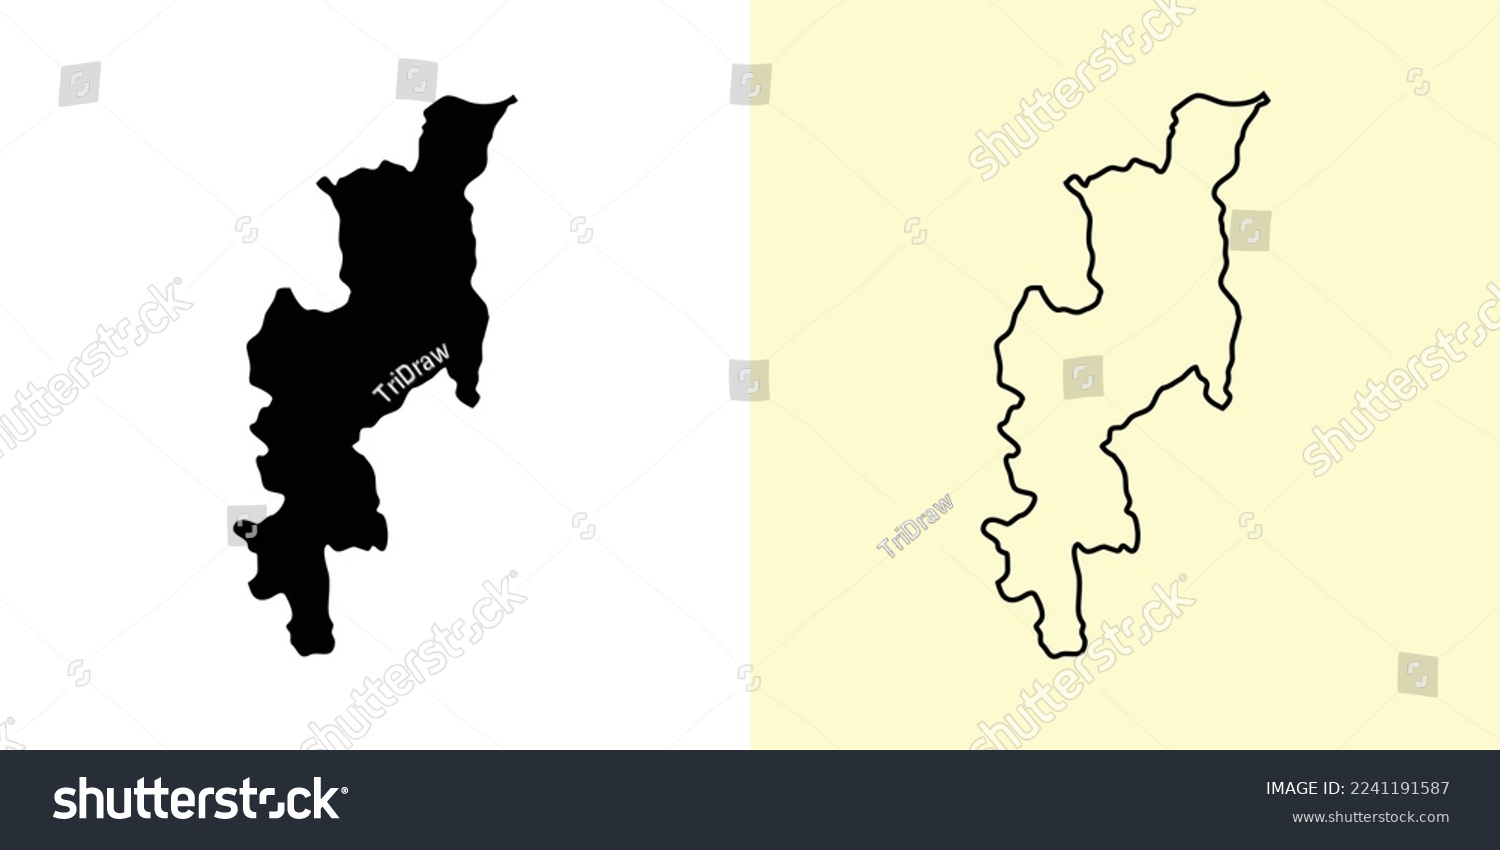 SVG of Chiang Mai map, Thailand, Asia. Filled and outline map designs. Vector illustration svg